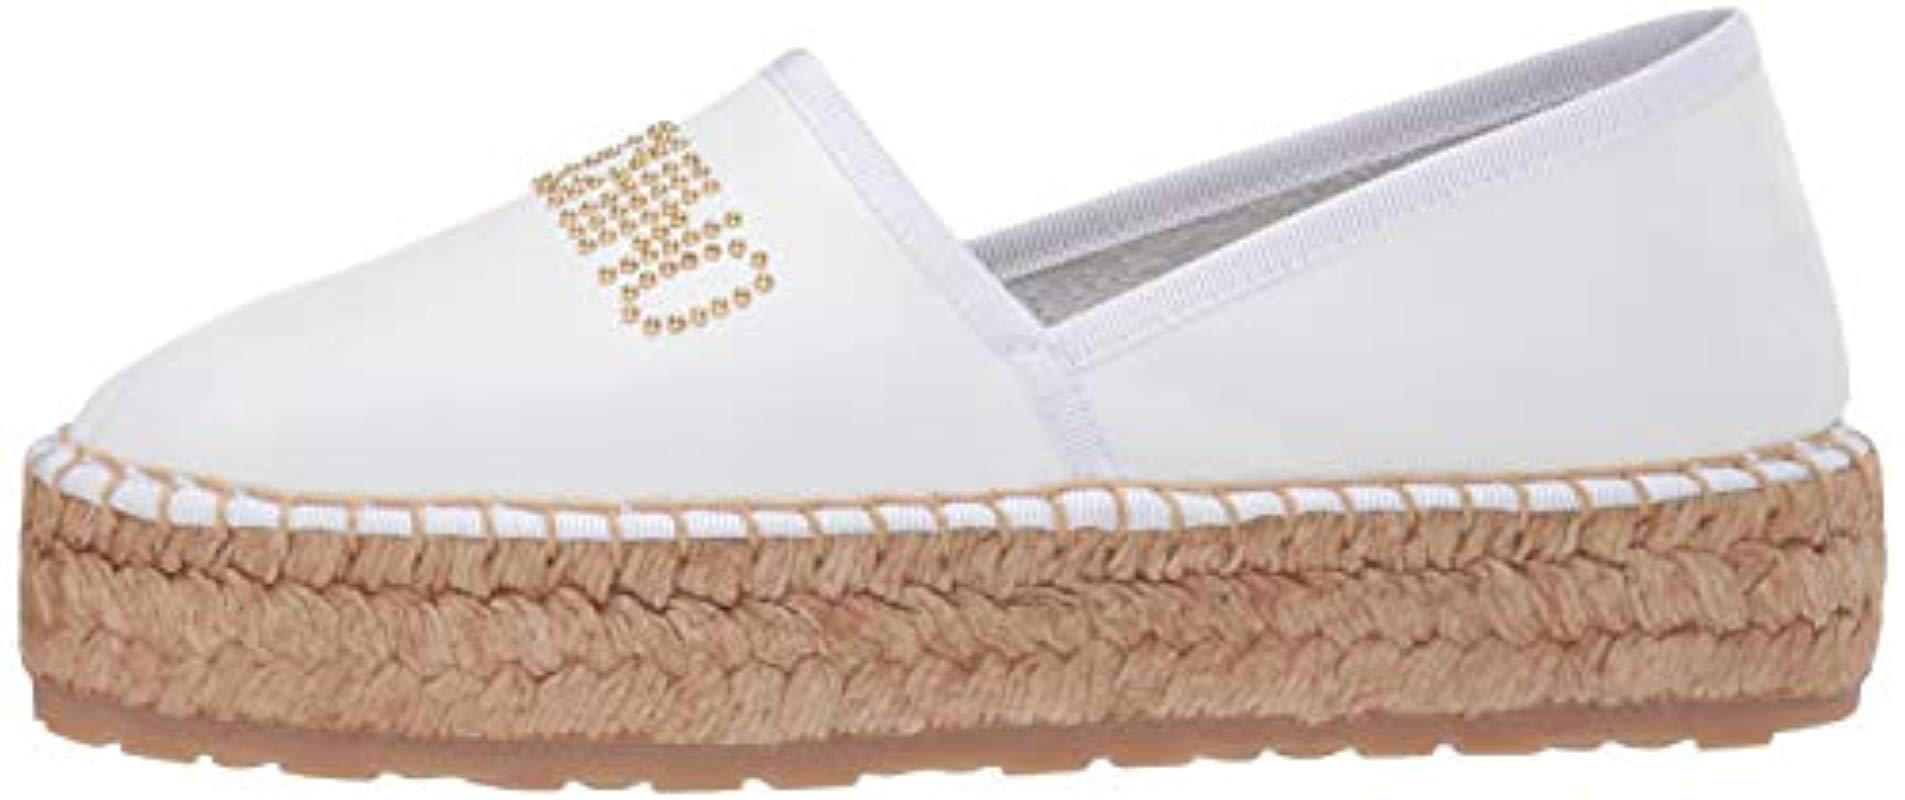 New WOMENS LOVE MOSCHINO WHITE NATURAL GEM LEATHER SHOES ESPADRILLES